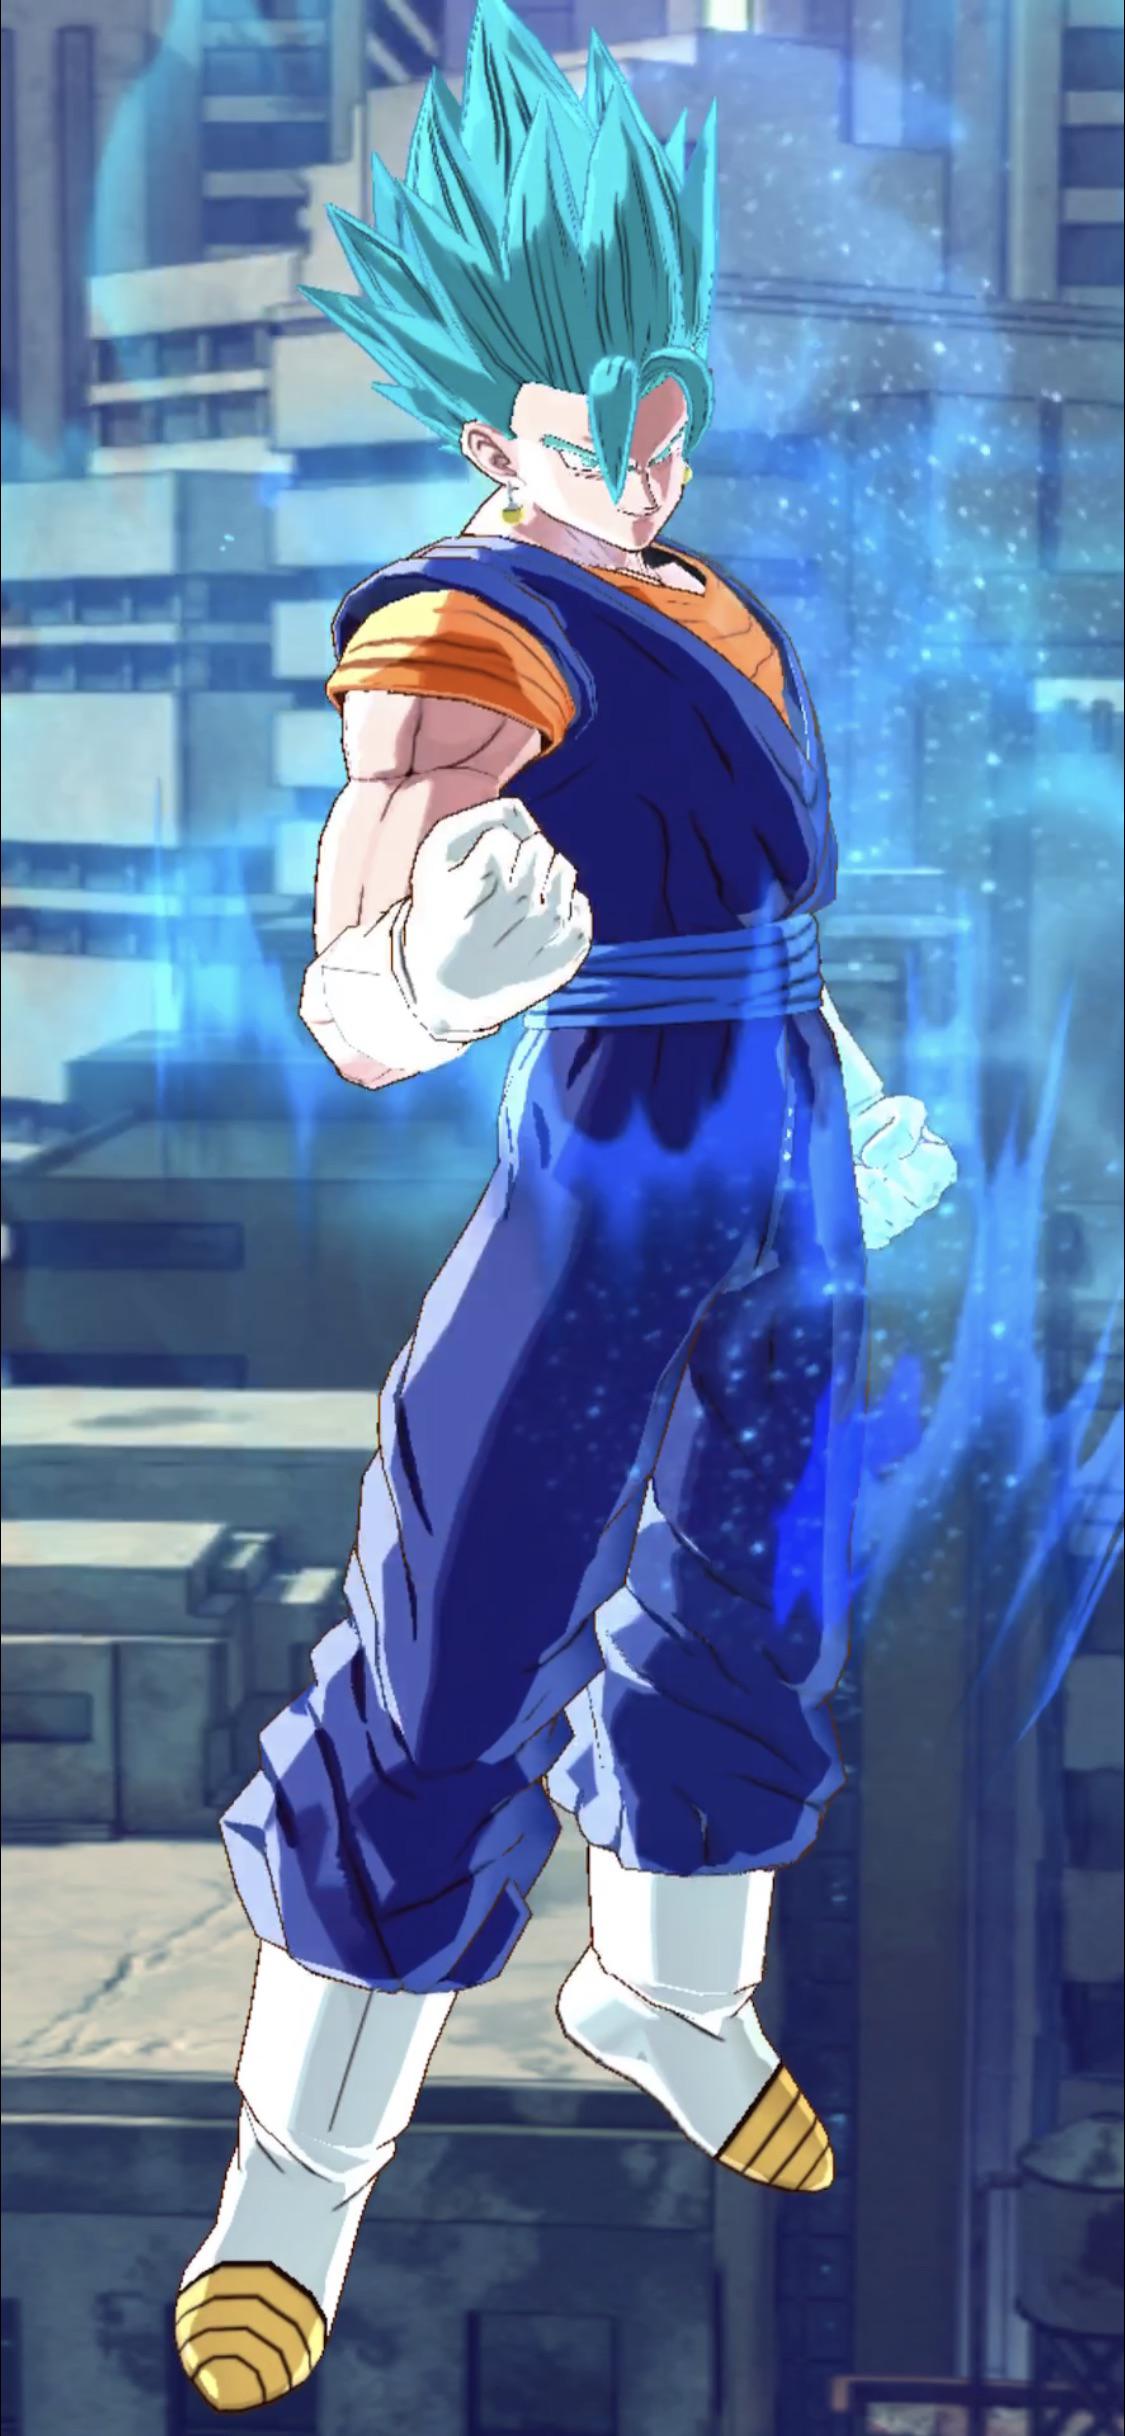 And this is vegito blue